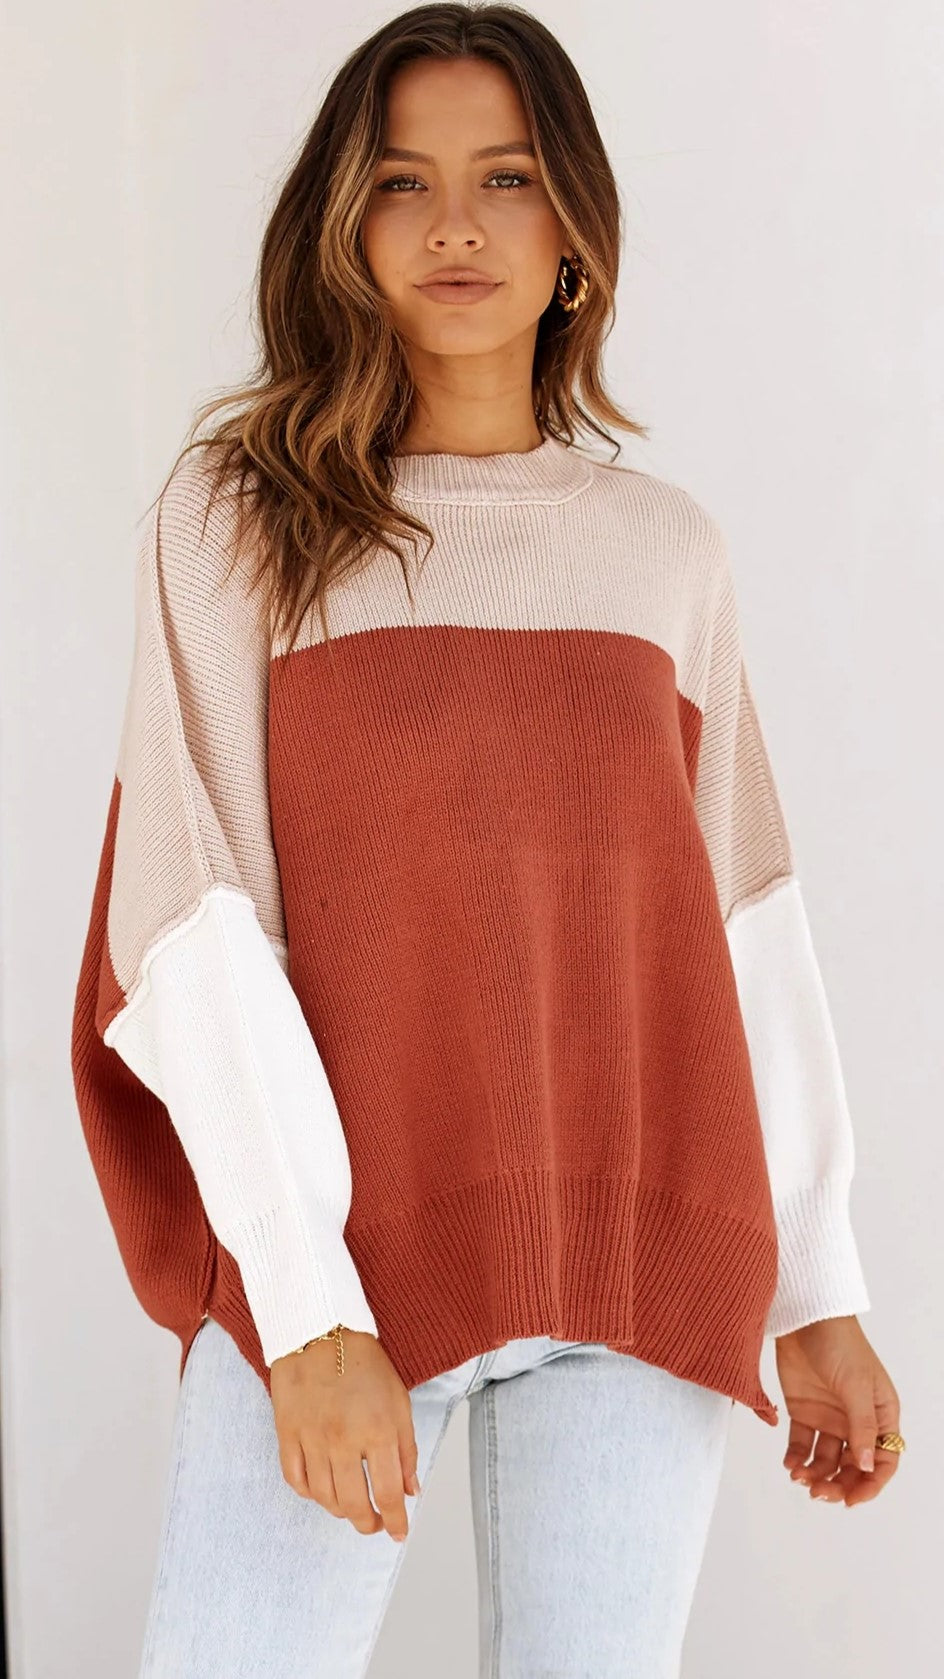 Brown Colorblocked Knit Sweater